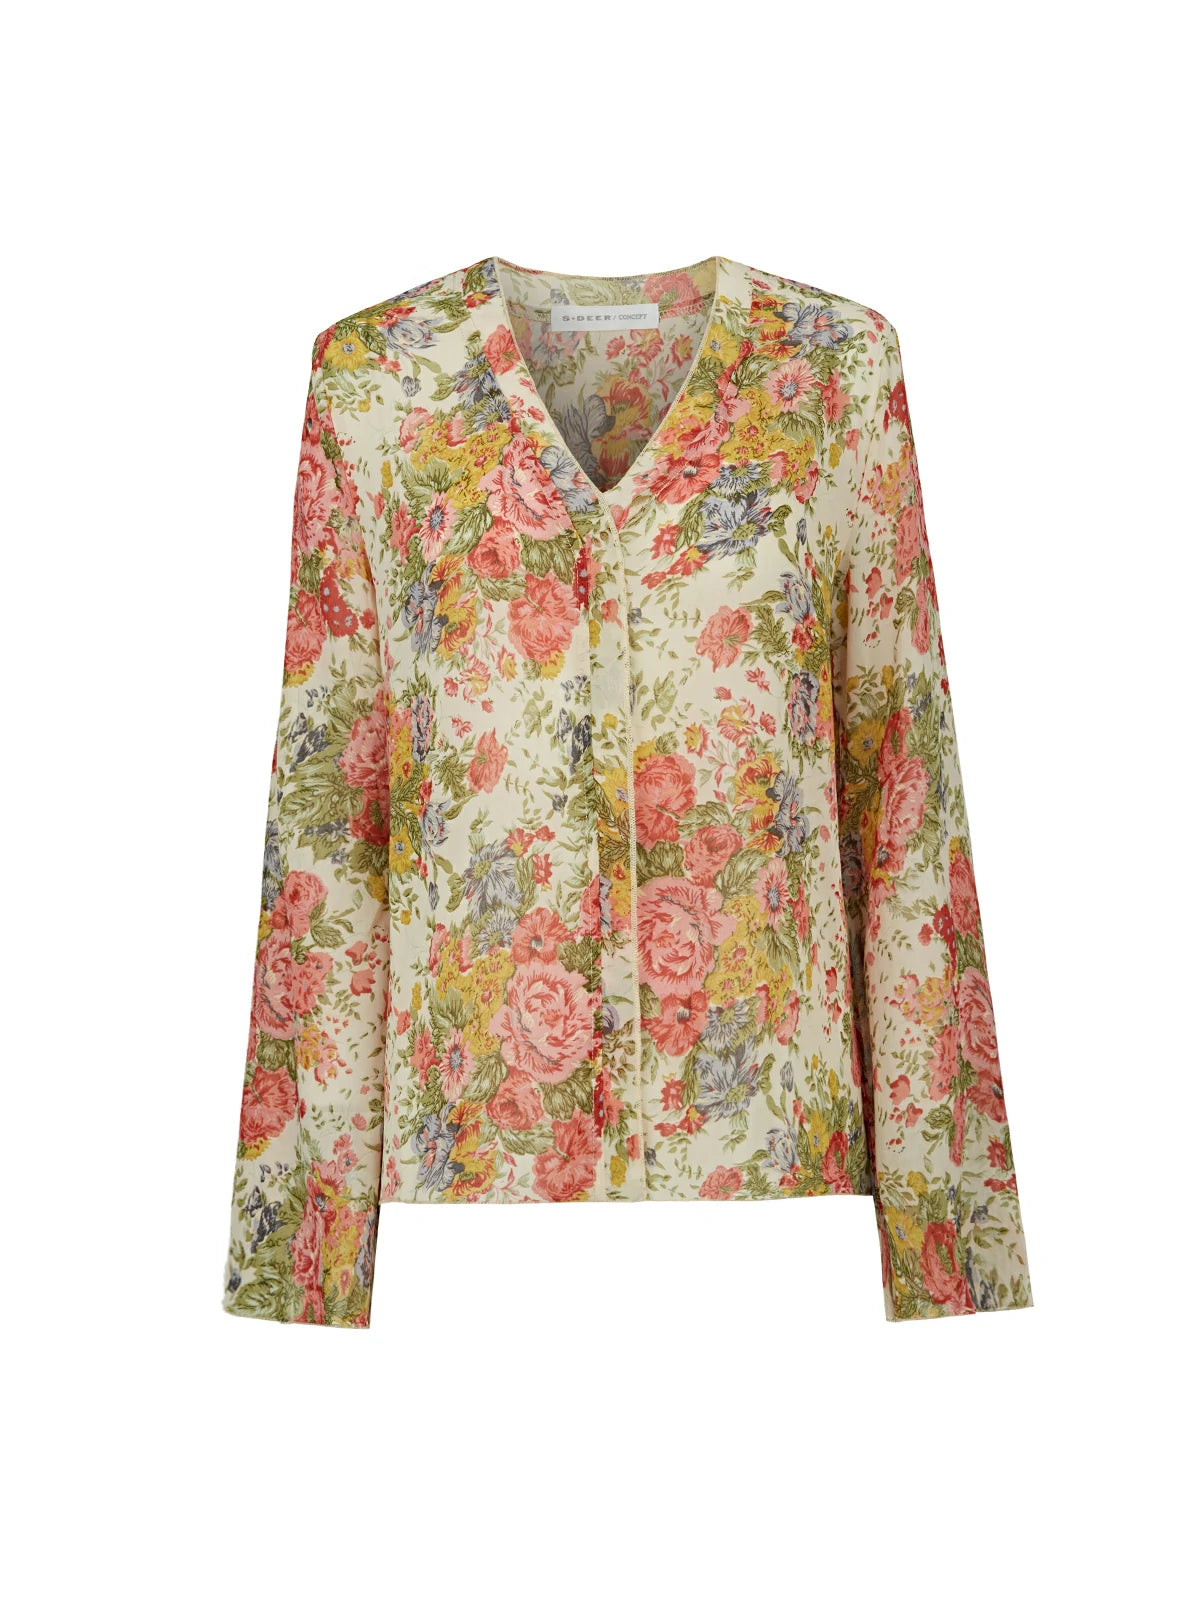 Lightweight and ethereal Bohemian blouse with floral print and V-neck, creating a romantic and feminine ambiance, perfect for versatile styling in casual settings.